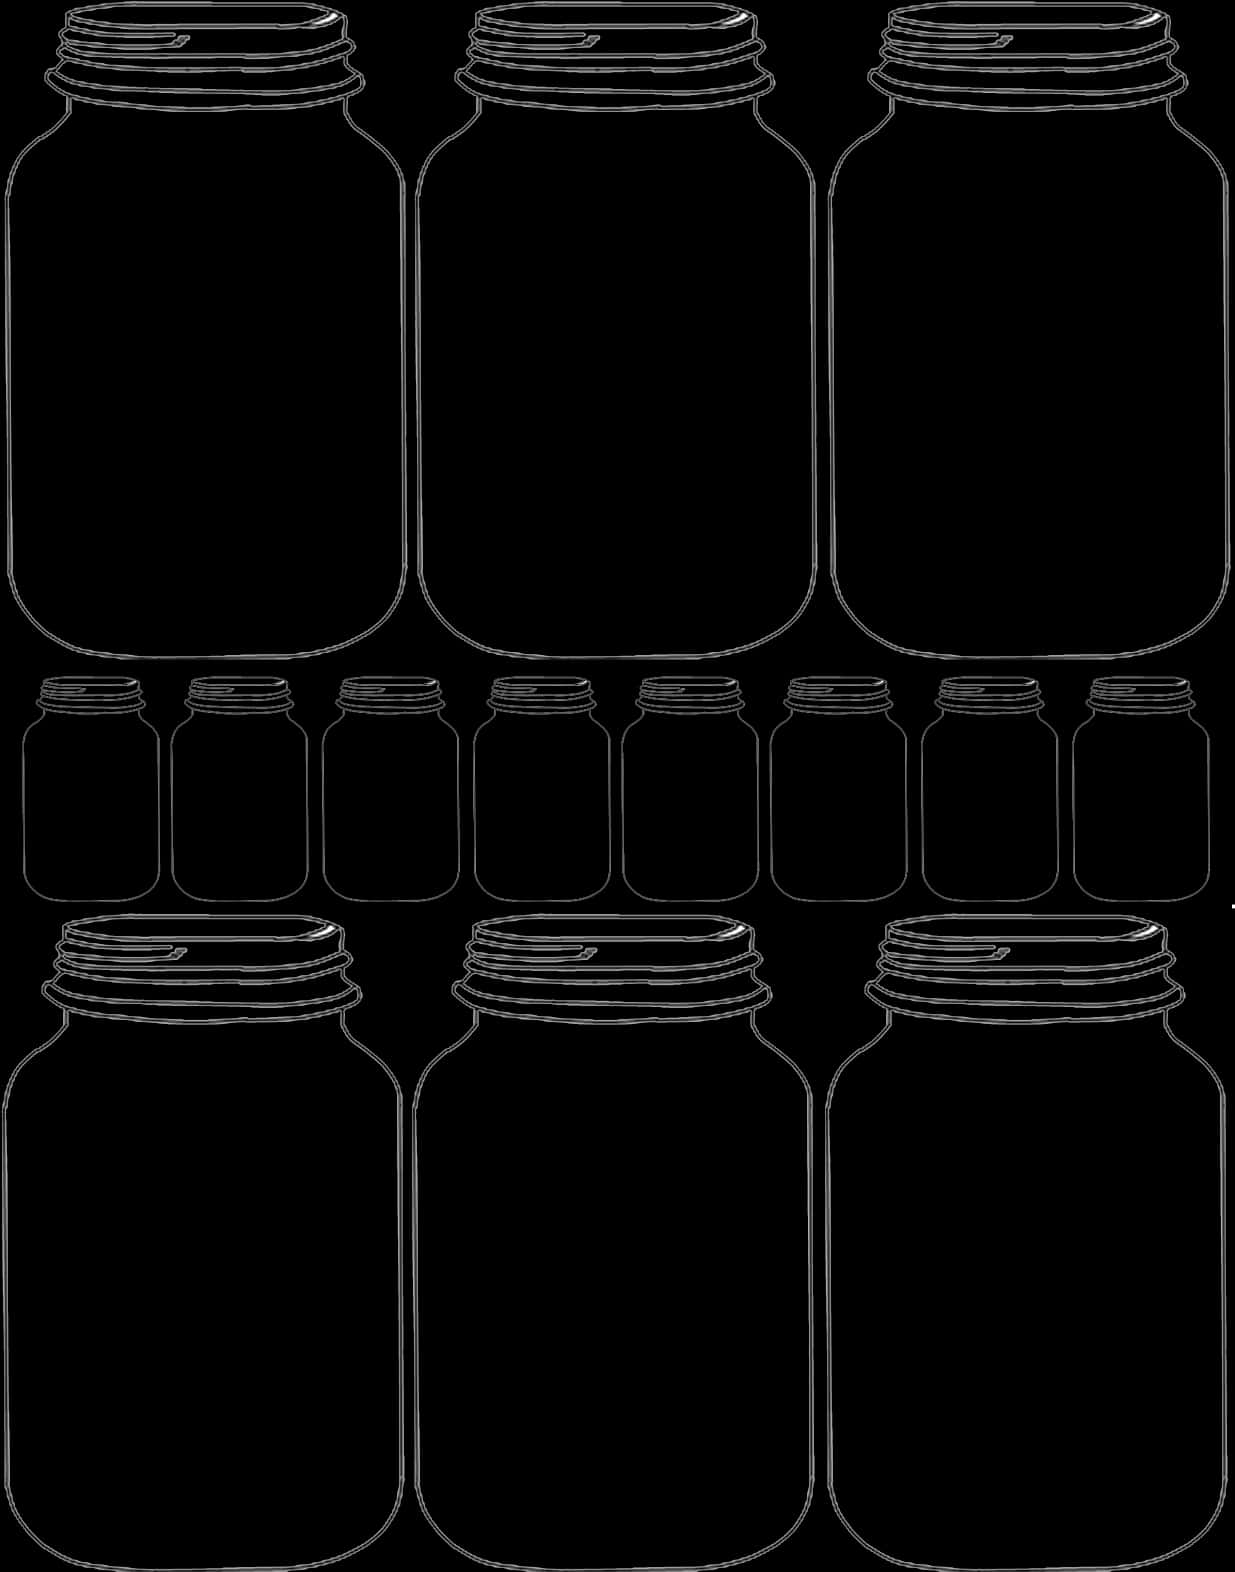 A Group Of Jars With Lids